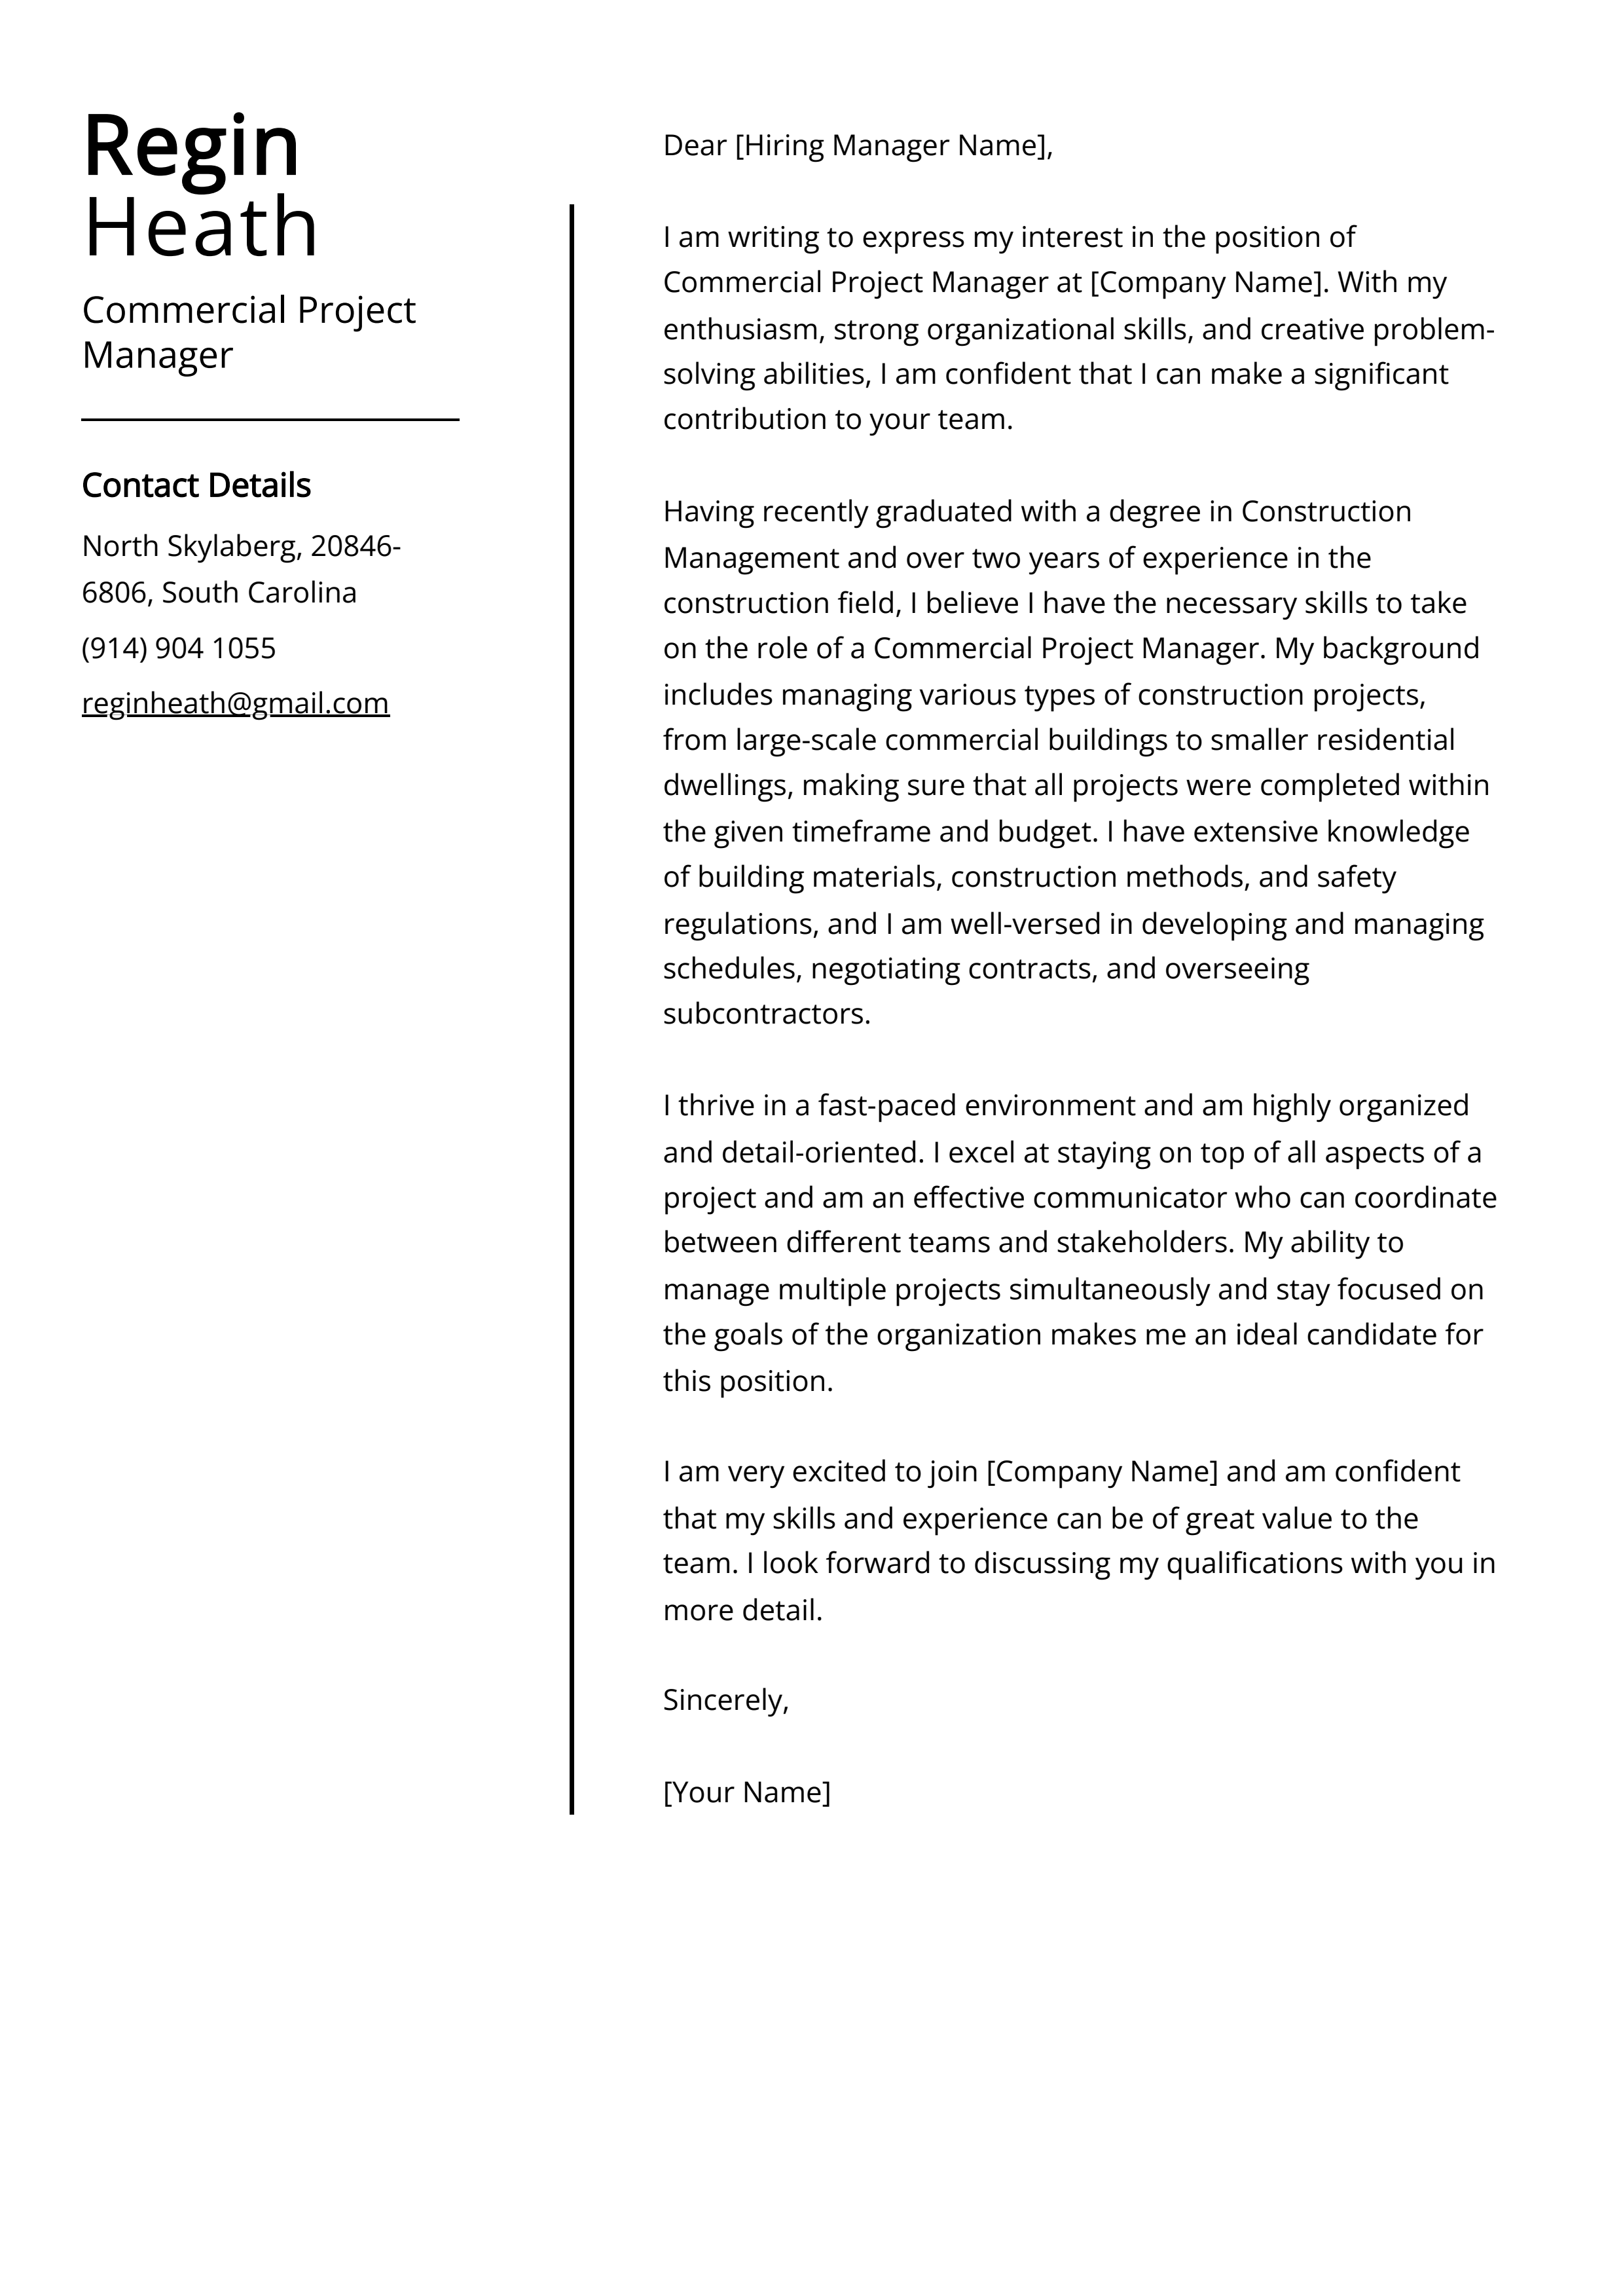 Commercial Project Manager Cover Letter Example